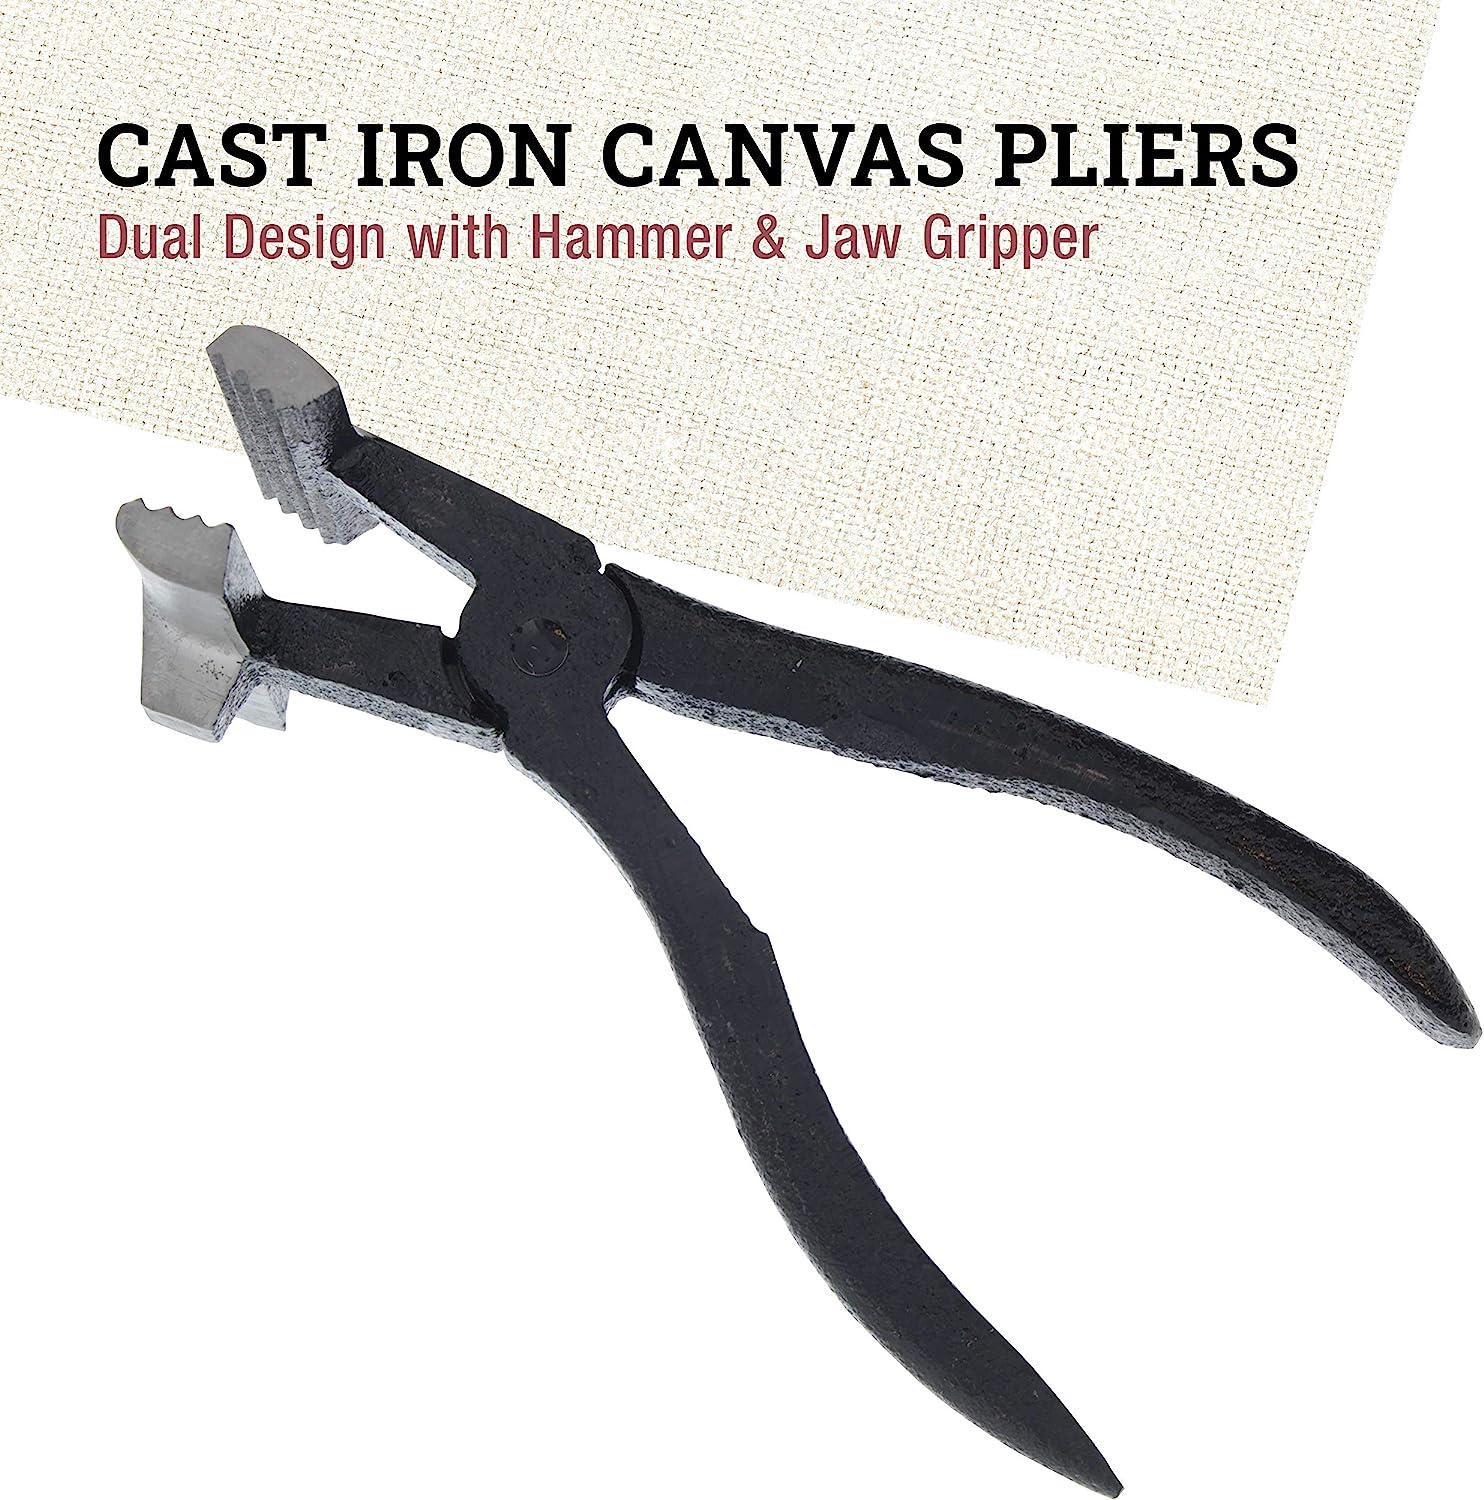 US Art Supply Iron Canvas Pliers, Dual Design with Hammer & Jaw Gripper